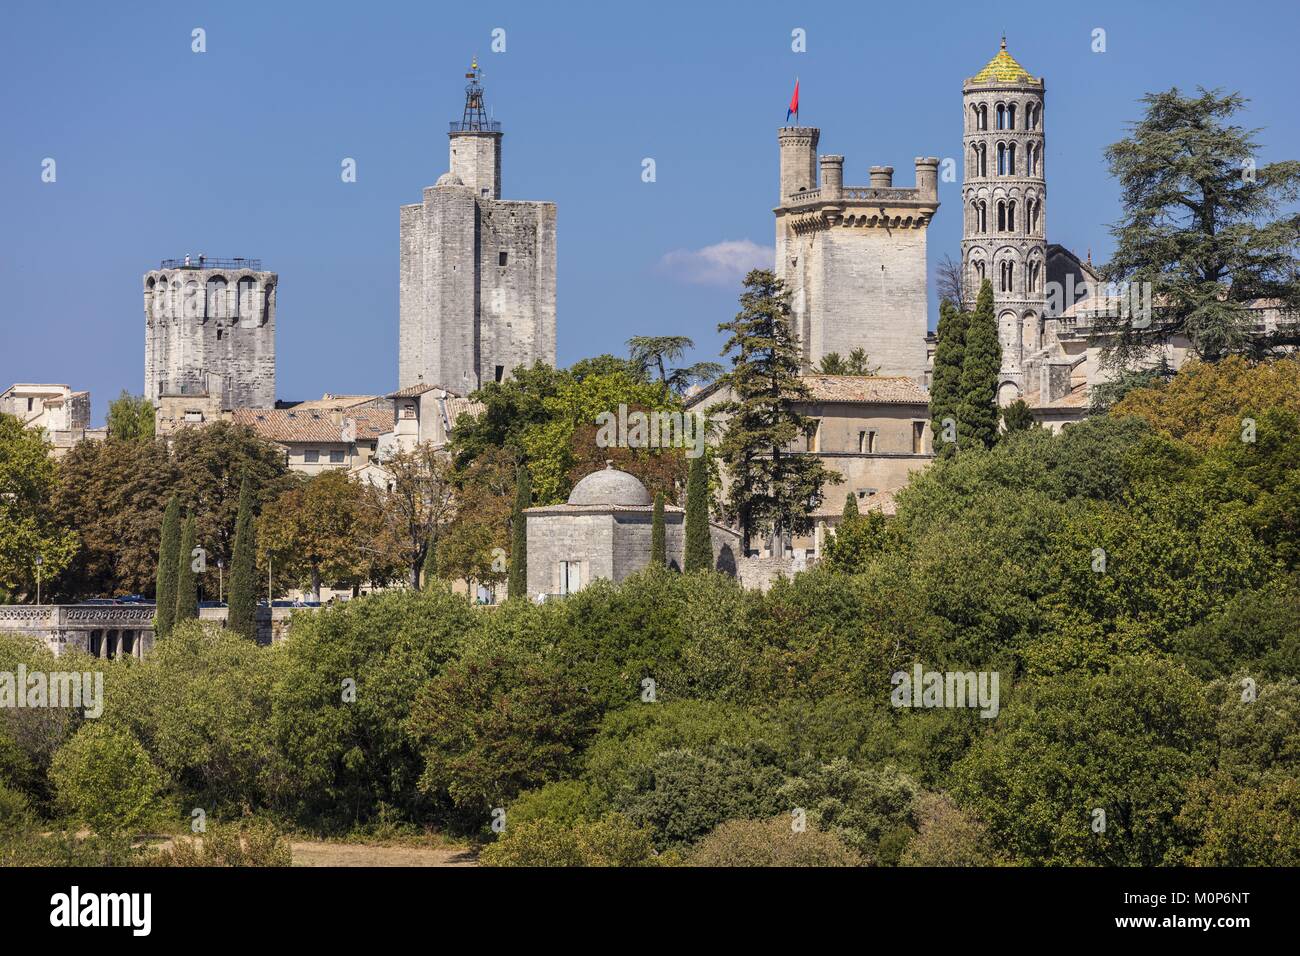 France,Gard,Pays d'Uzege,Uzes,the Ducal castle known as the Duche and St Theodorit Cathedral with the Fenestrelle tower Stock Photo